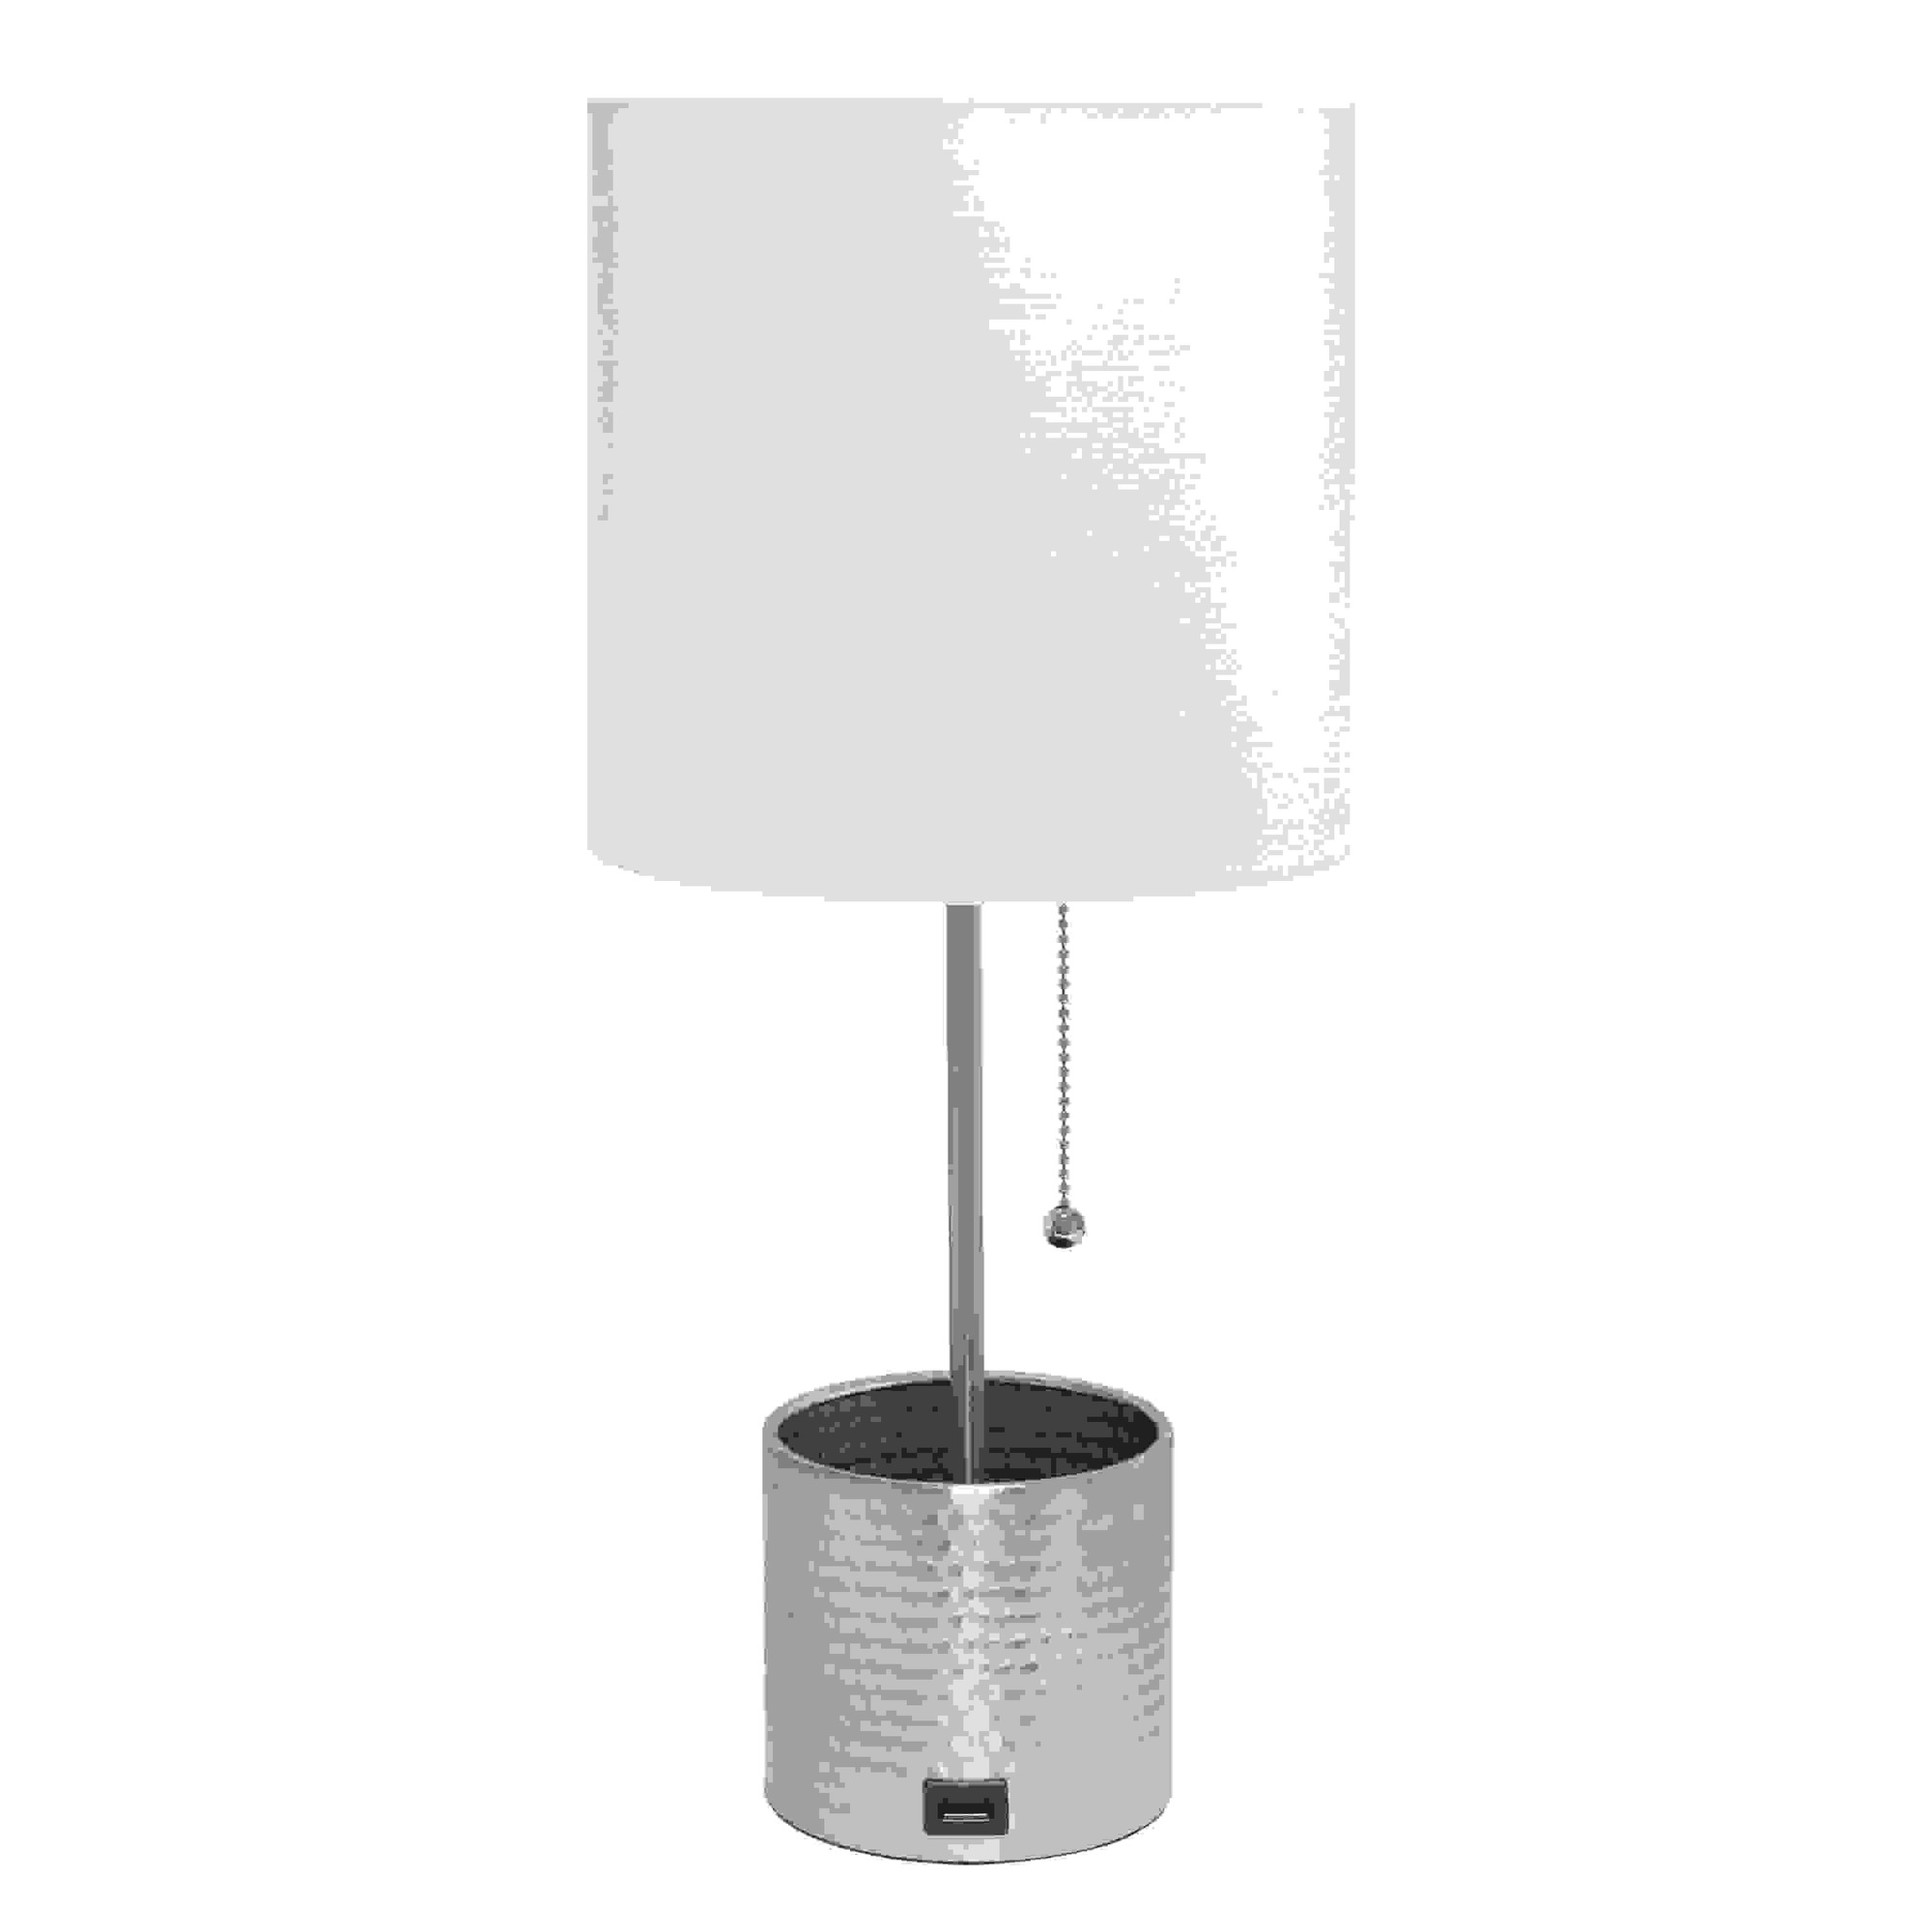 Simple Designs Hammered Metal Organizer Table Lamp with USB charging port and Fabric Shade, Brushed Nickel